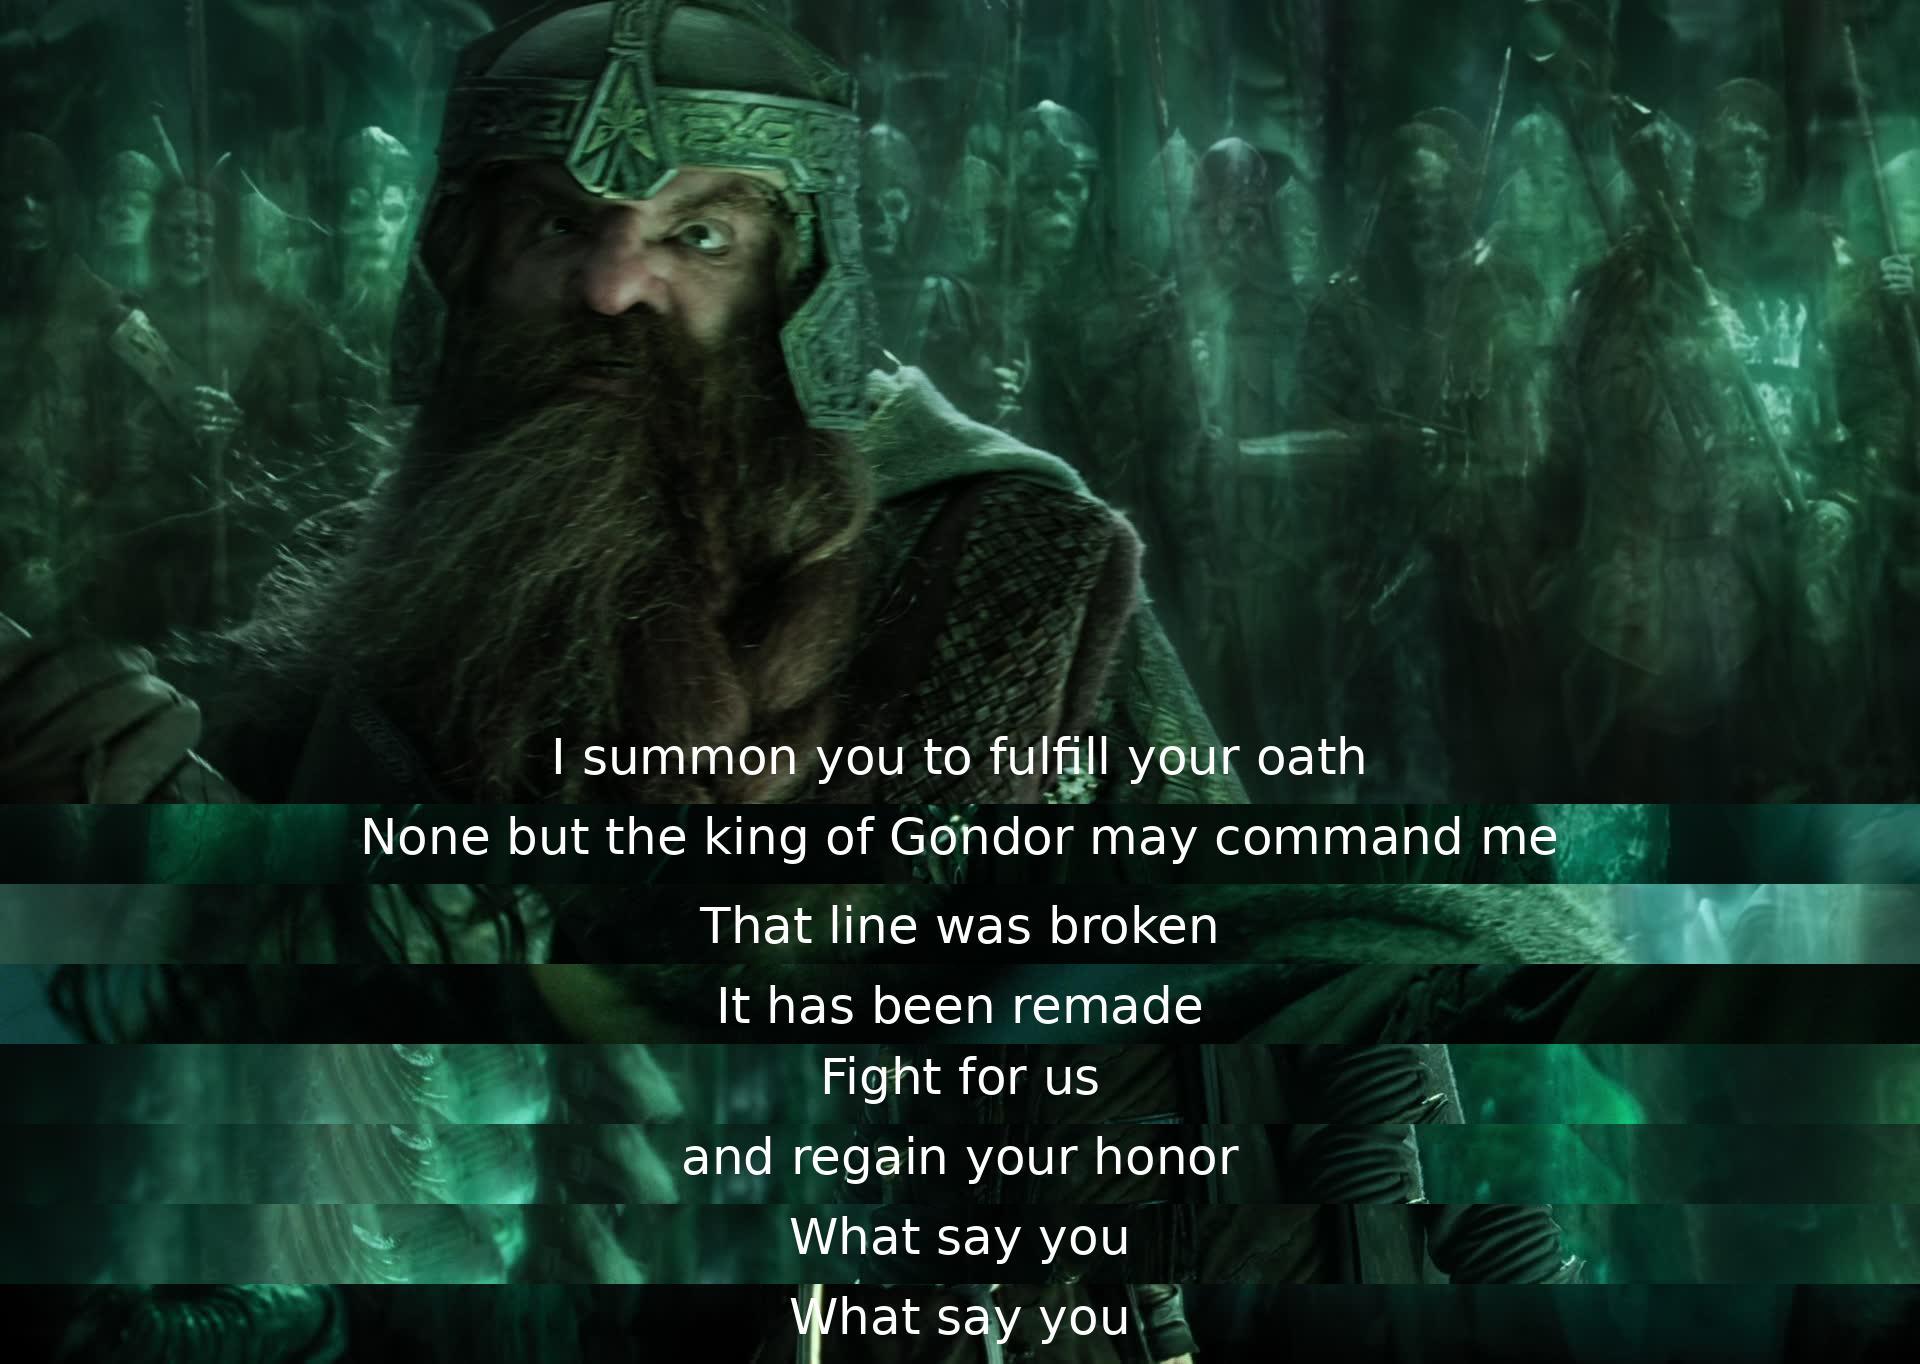 A leader calls upon a warrior to honor his pledge. The warrior reminds the leader only the King of Gondor can command him. The leader affirms the oath has been renewed and asks the warrior to fight for them and reclaim his honor. The leader seeks a response.